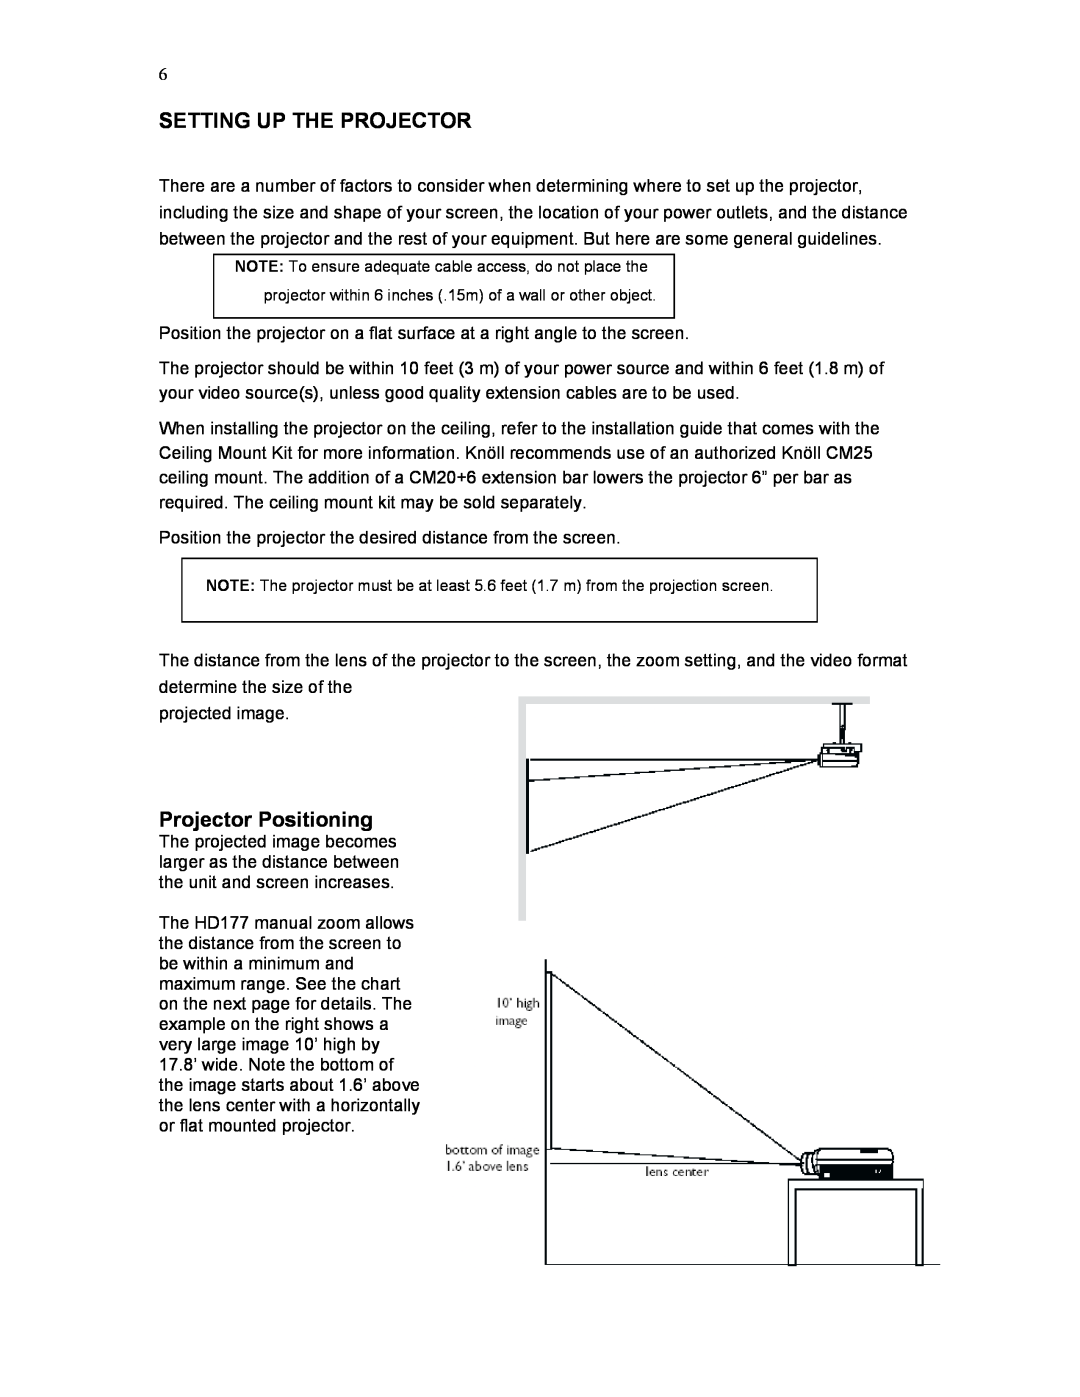 Knoll Systems HD177 user manual Setting Up The Projector, Projector Positioning 